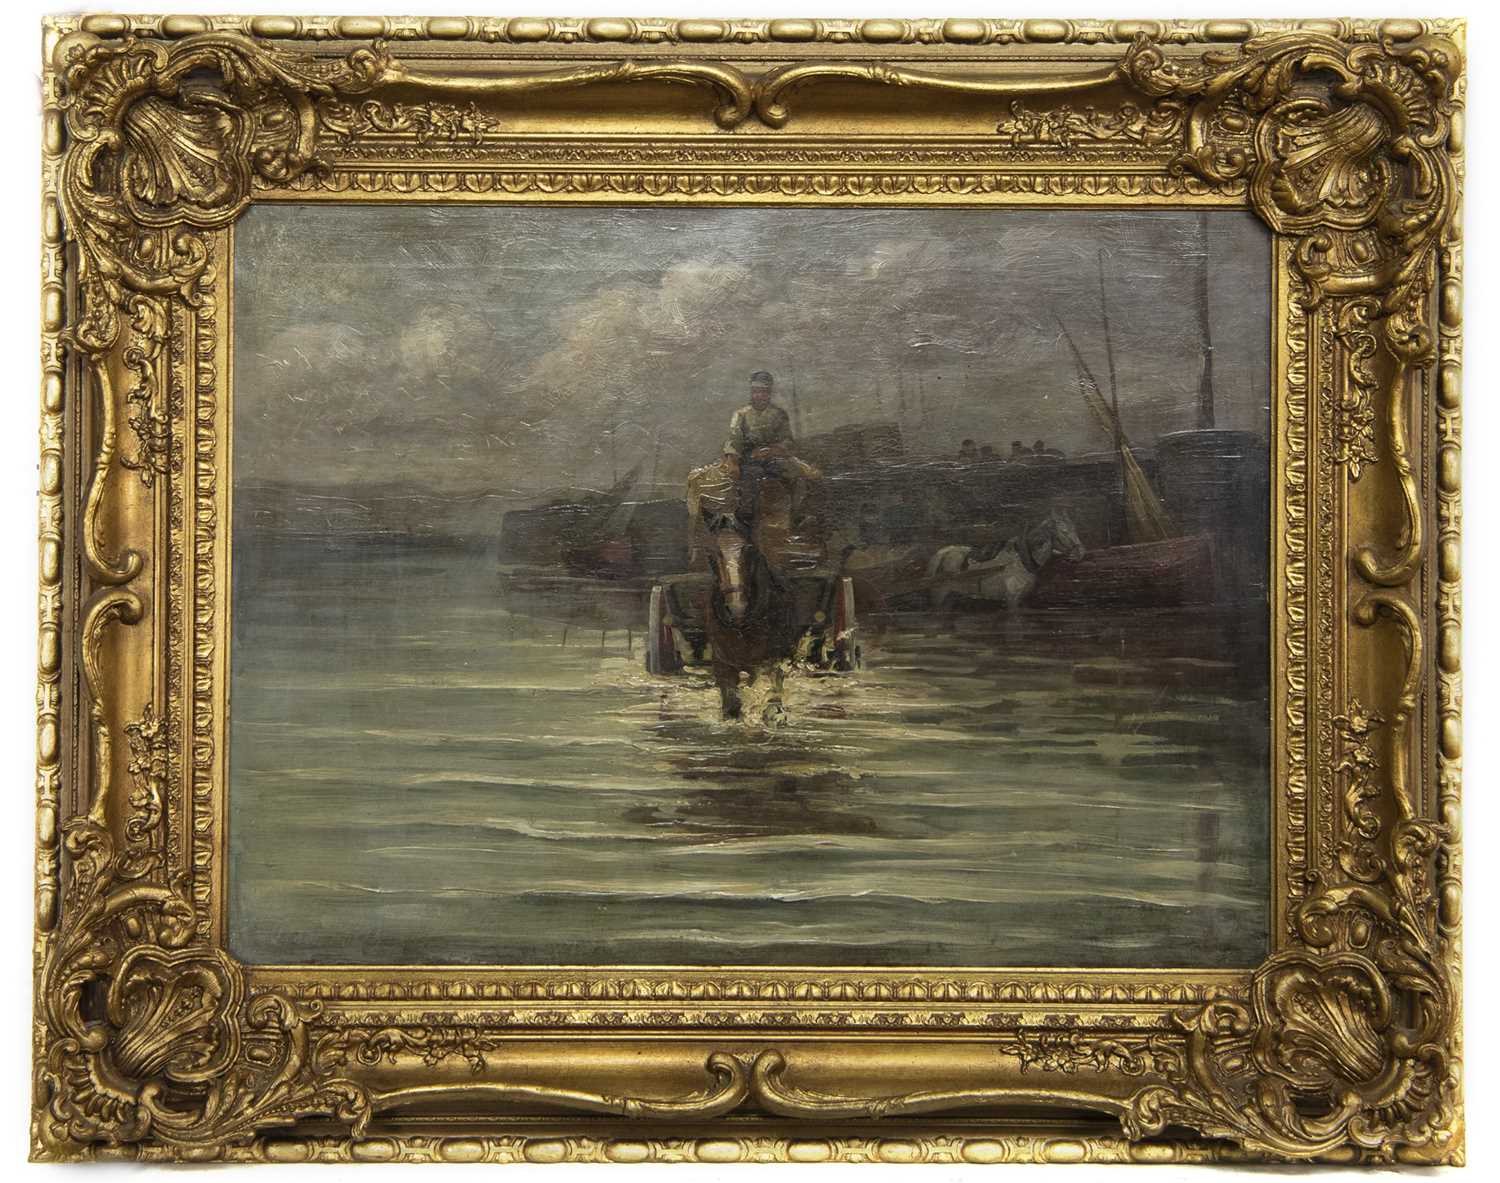 Lot 516 - HORSE CARRIAGE, AN OIL